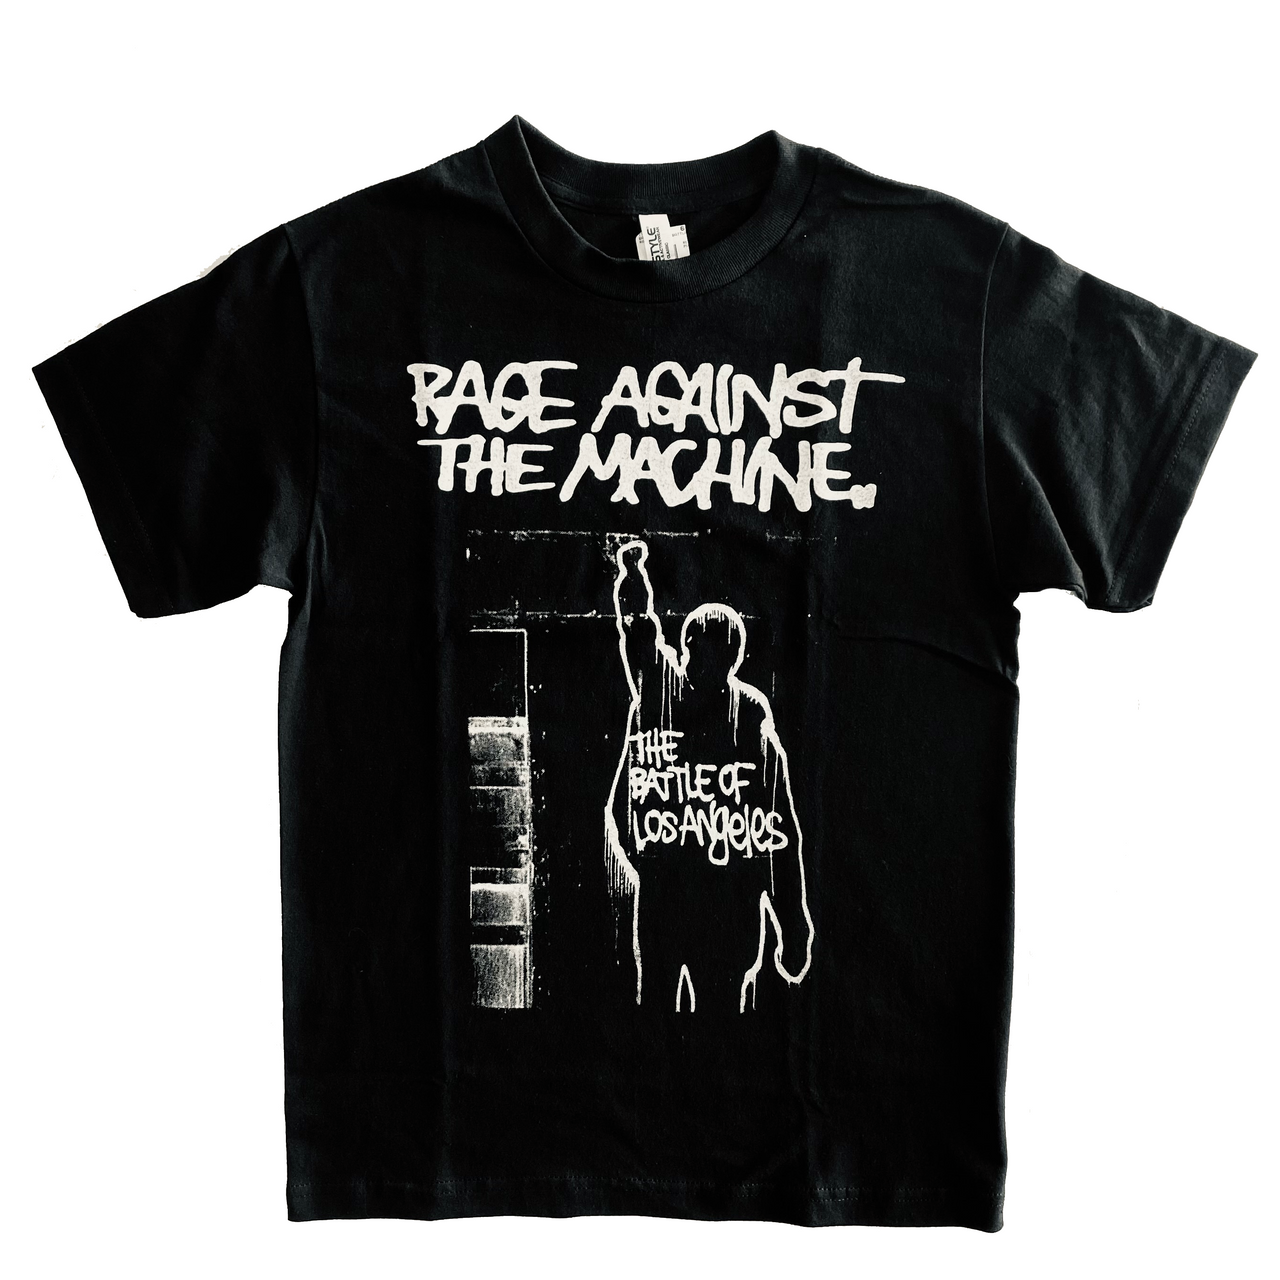 Rage Against the Machine Battle of Los Angeles T-Shirt